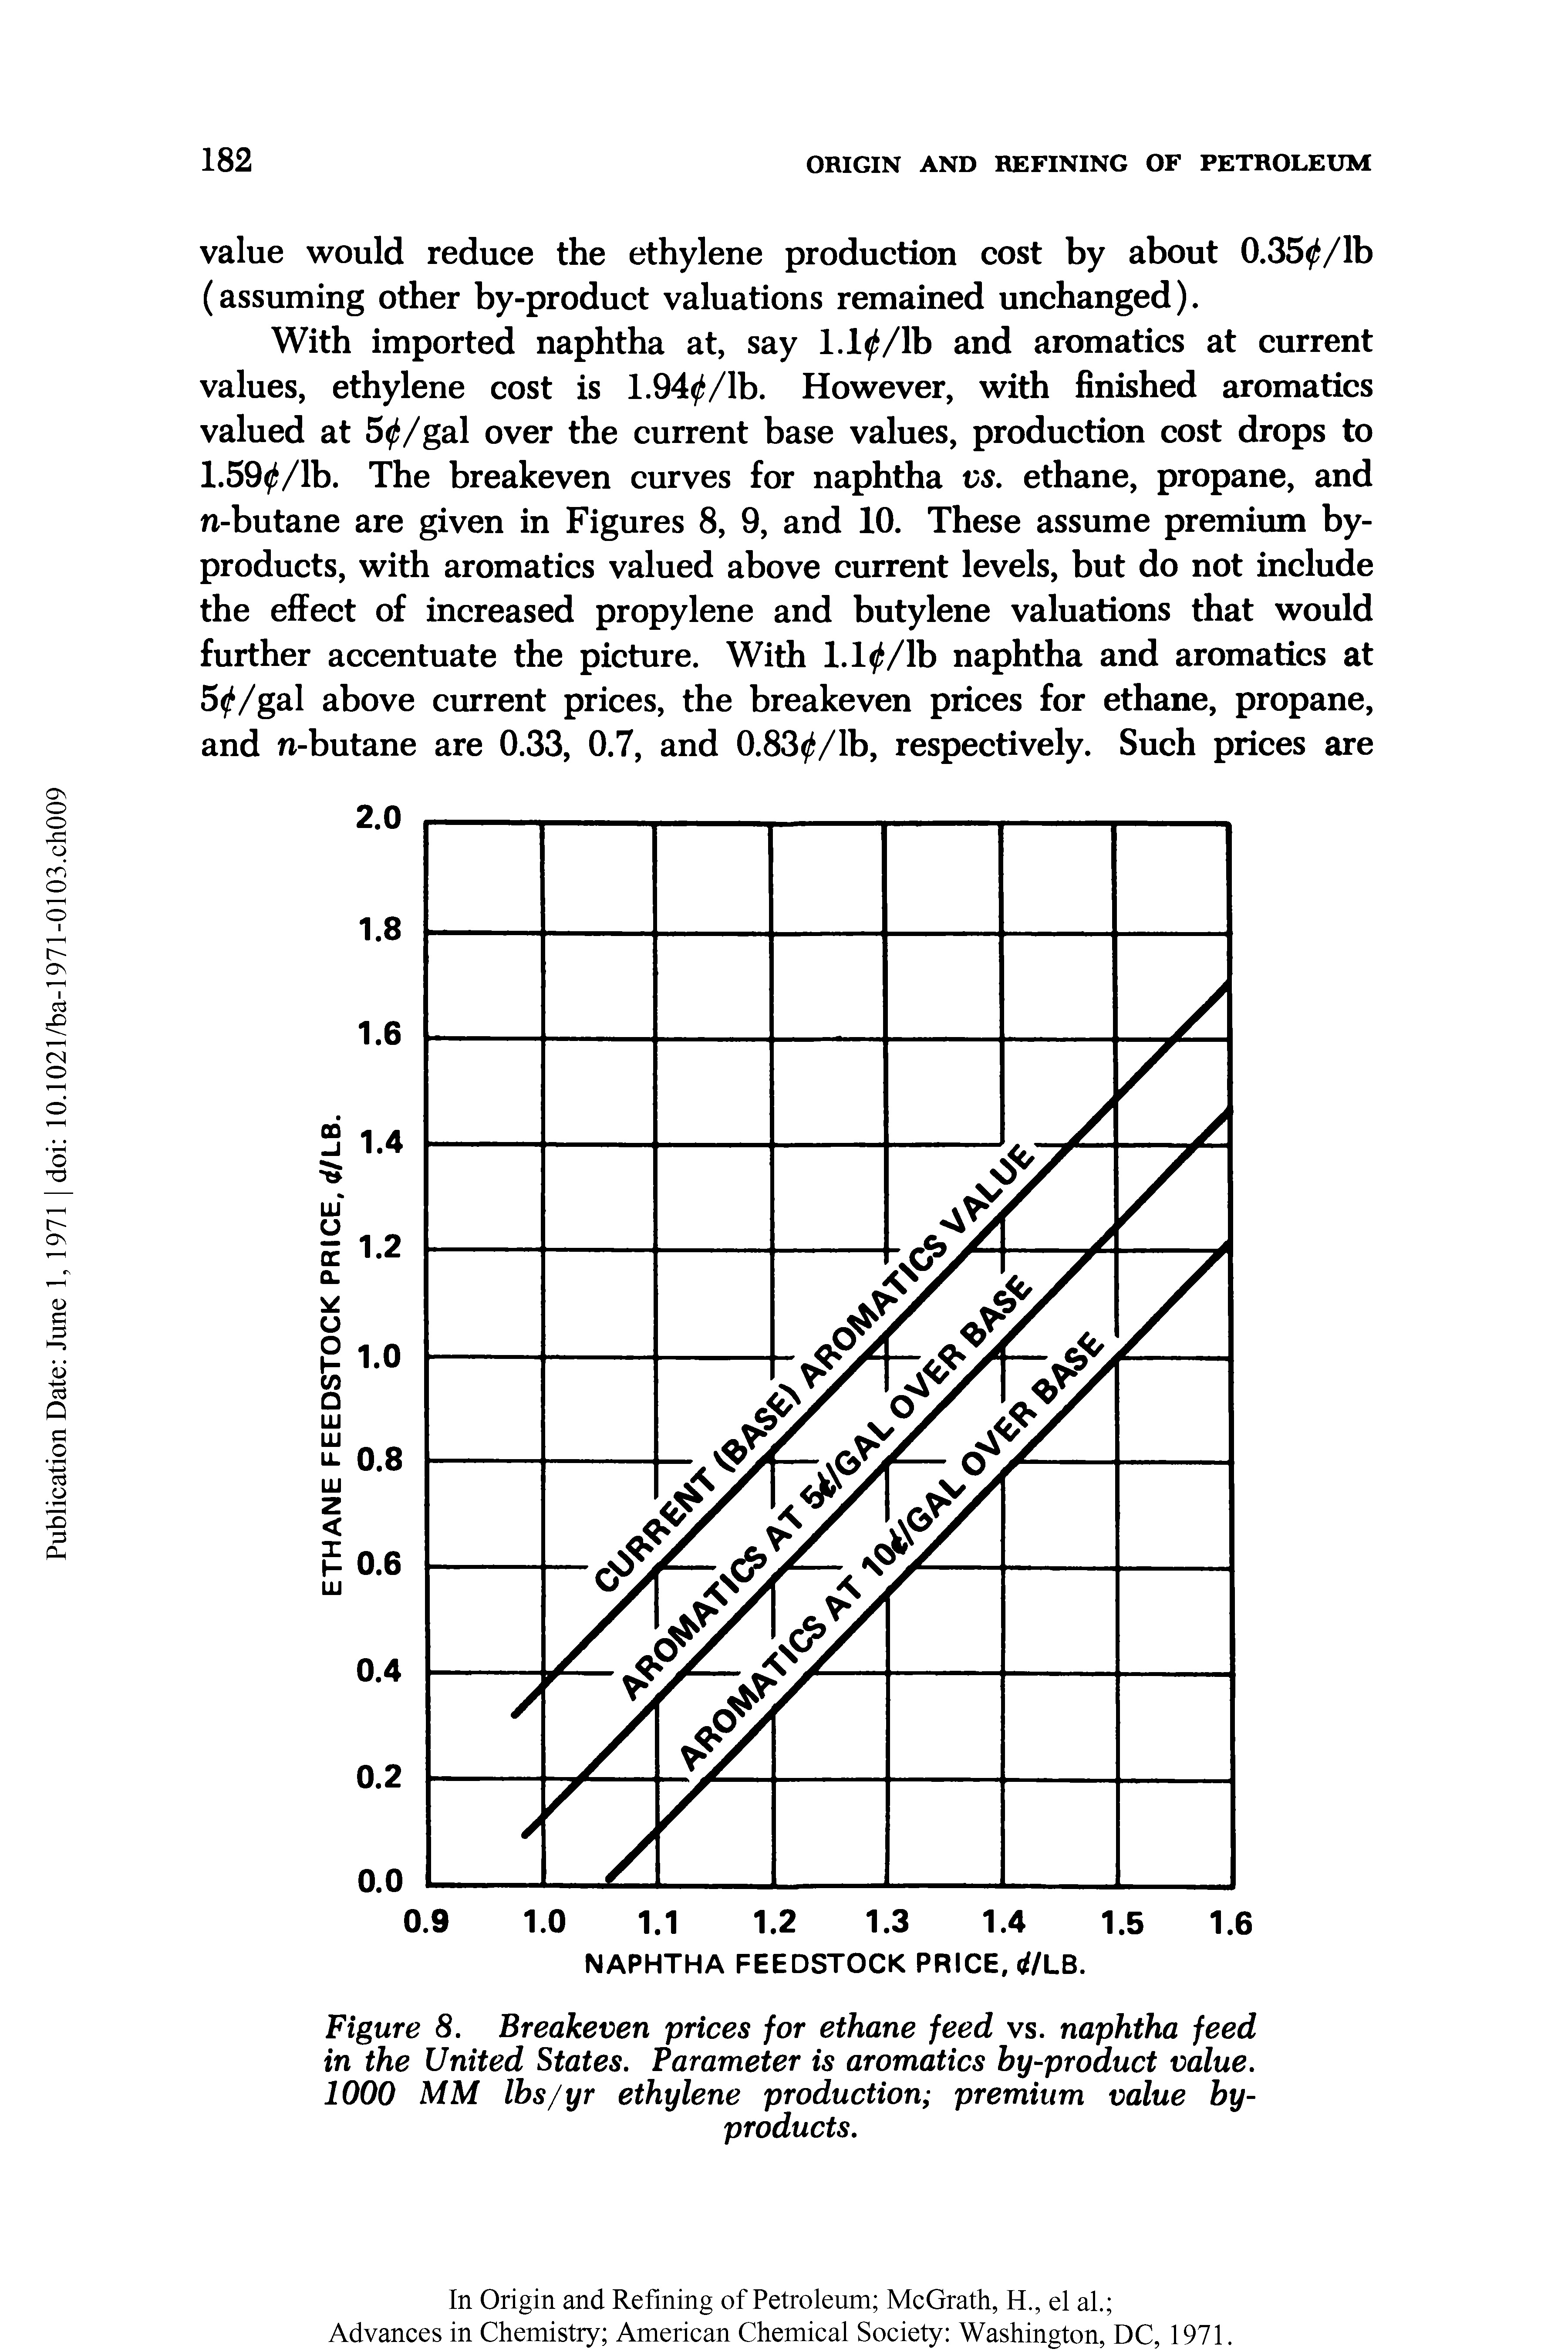 Figure 8. Breakeven prices for ethane feed vs. naphtha feed in the United States. Parameter is aromatics by-product value. 1000 MM Ibs/yr ethylene production premium value byproducts.